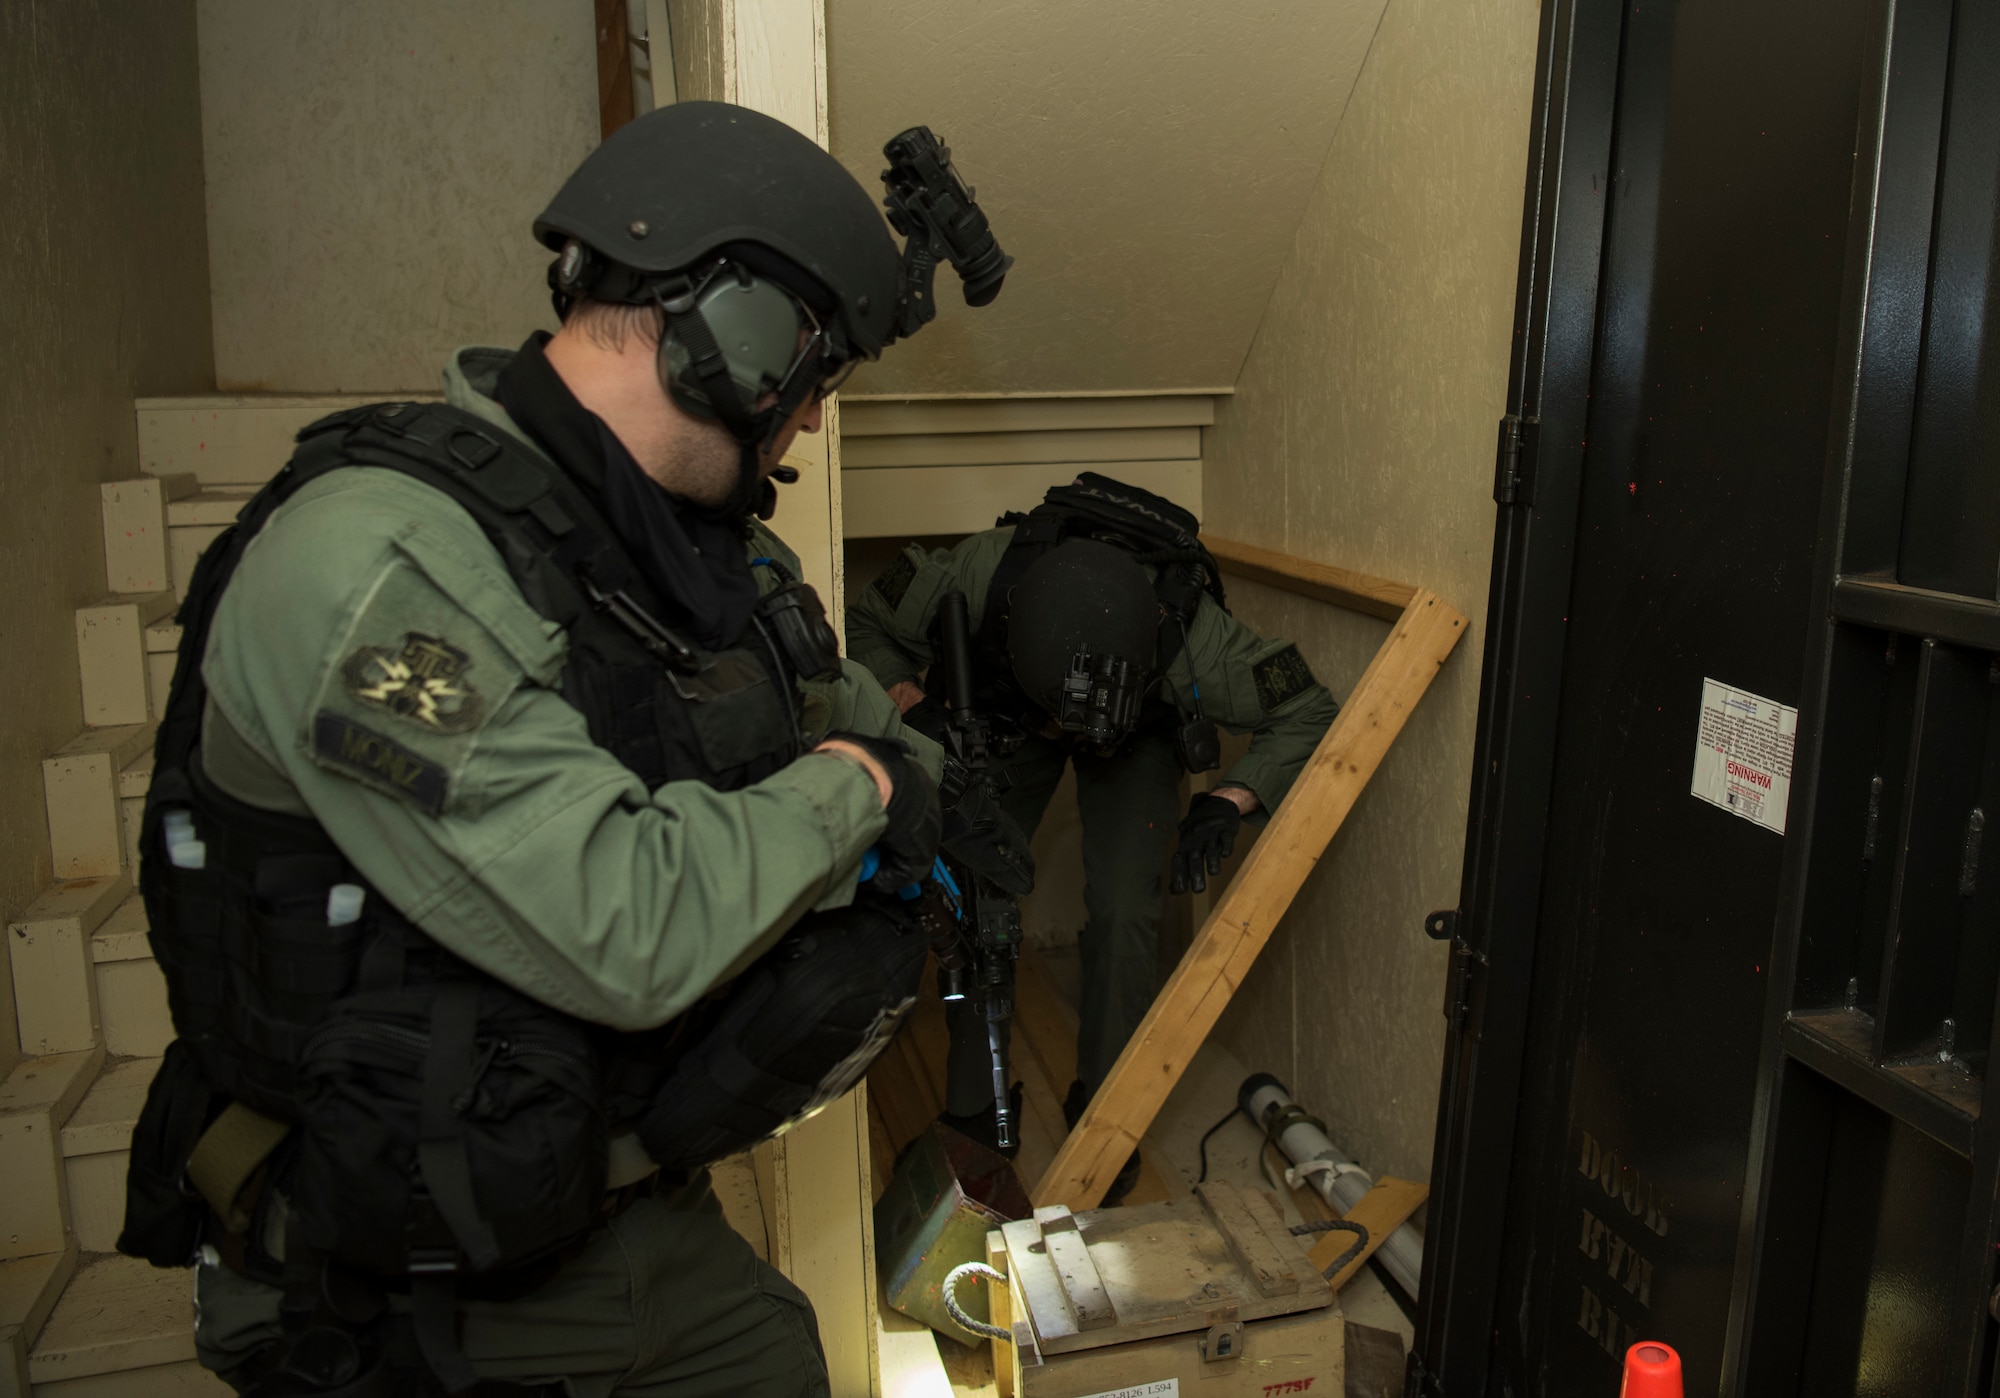 Members of the Charleston County S.W.A.T. team clear a room in a shoot house during a joint training exercise with Citadel cadets and members of the 628th Security Forces Squadron April 12, 2019, on Naval Weapons Station Charleston, Joint Base Charleston, S.C.